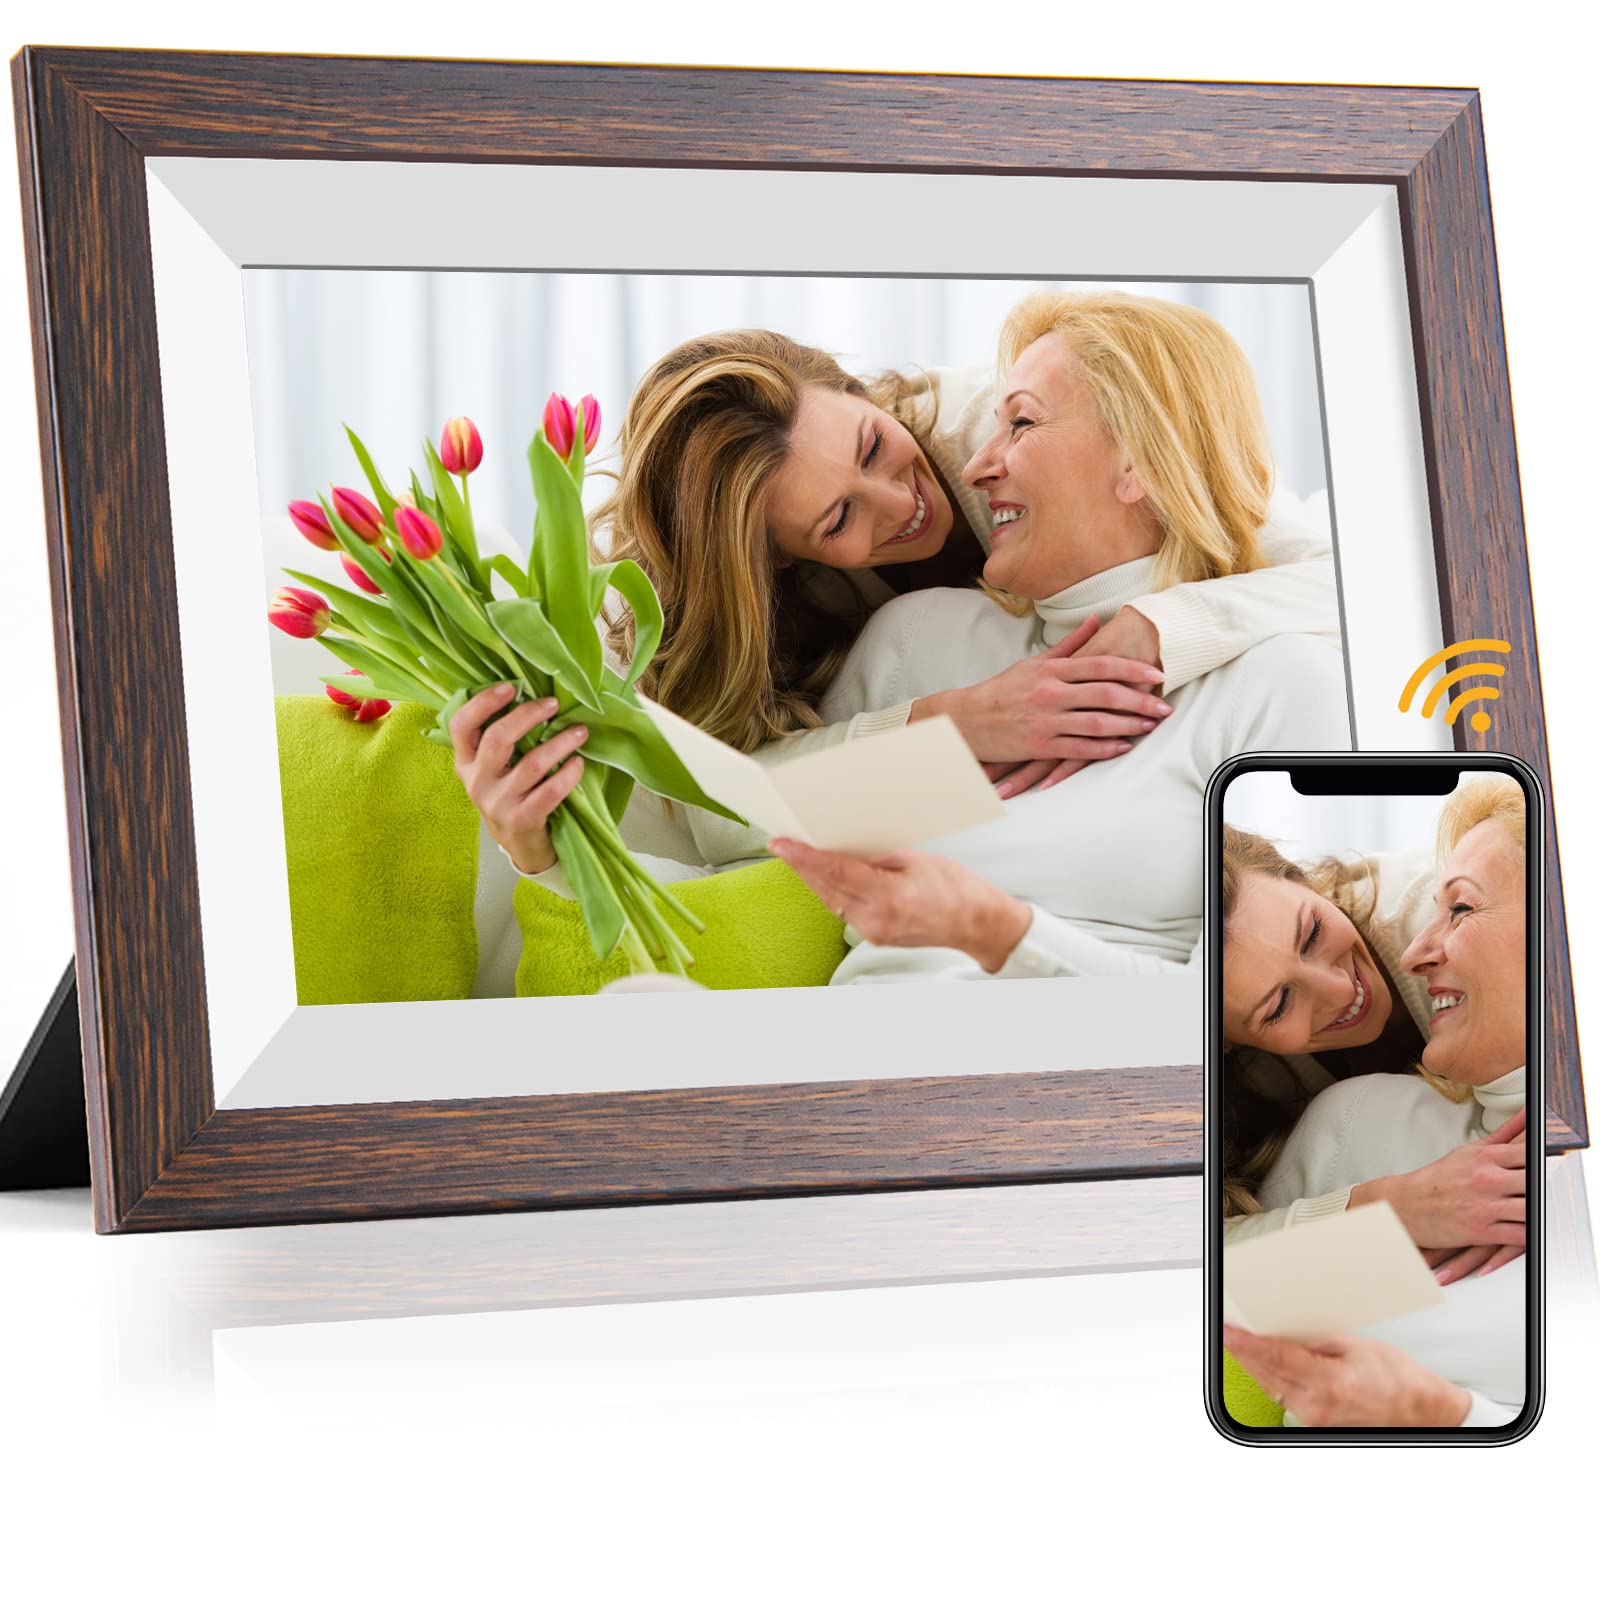 how-to-buy-digital-picture-frame